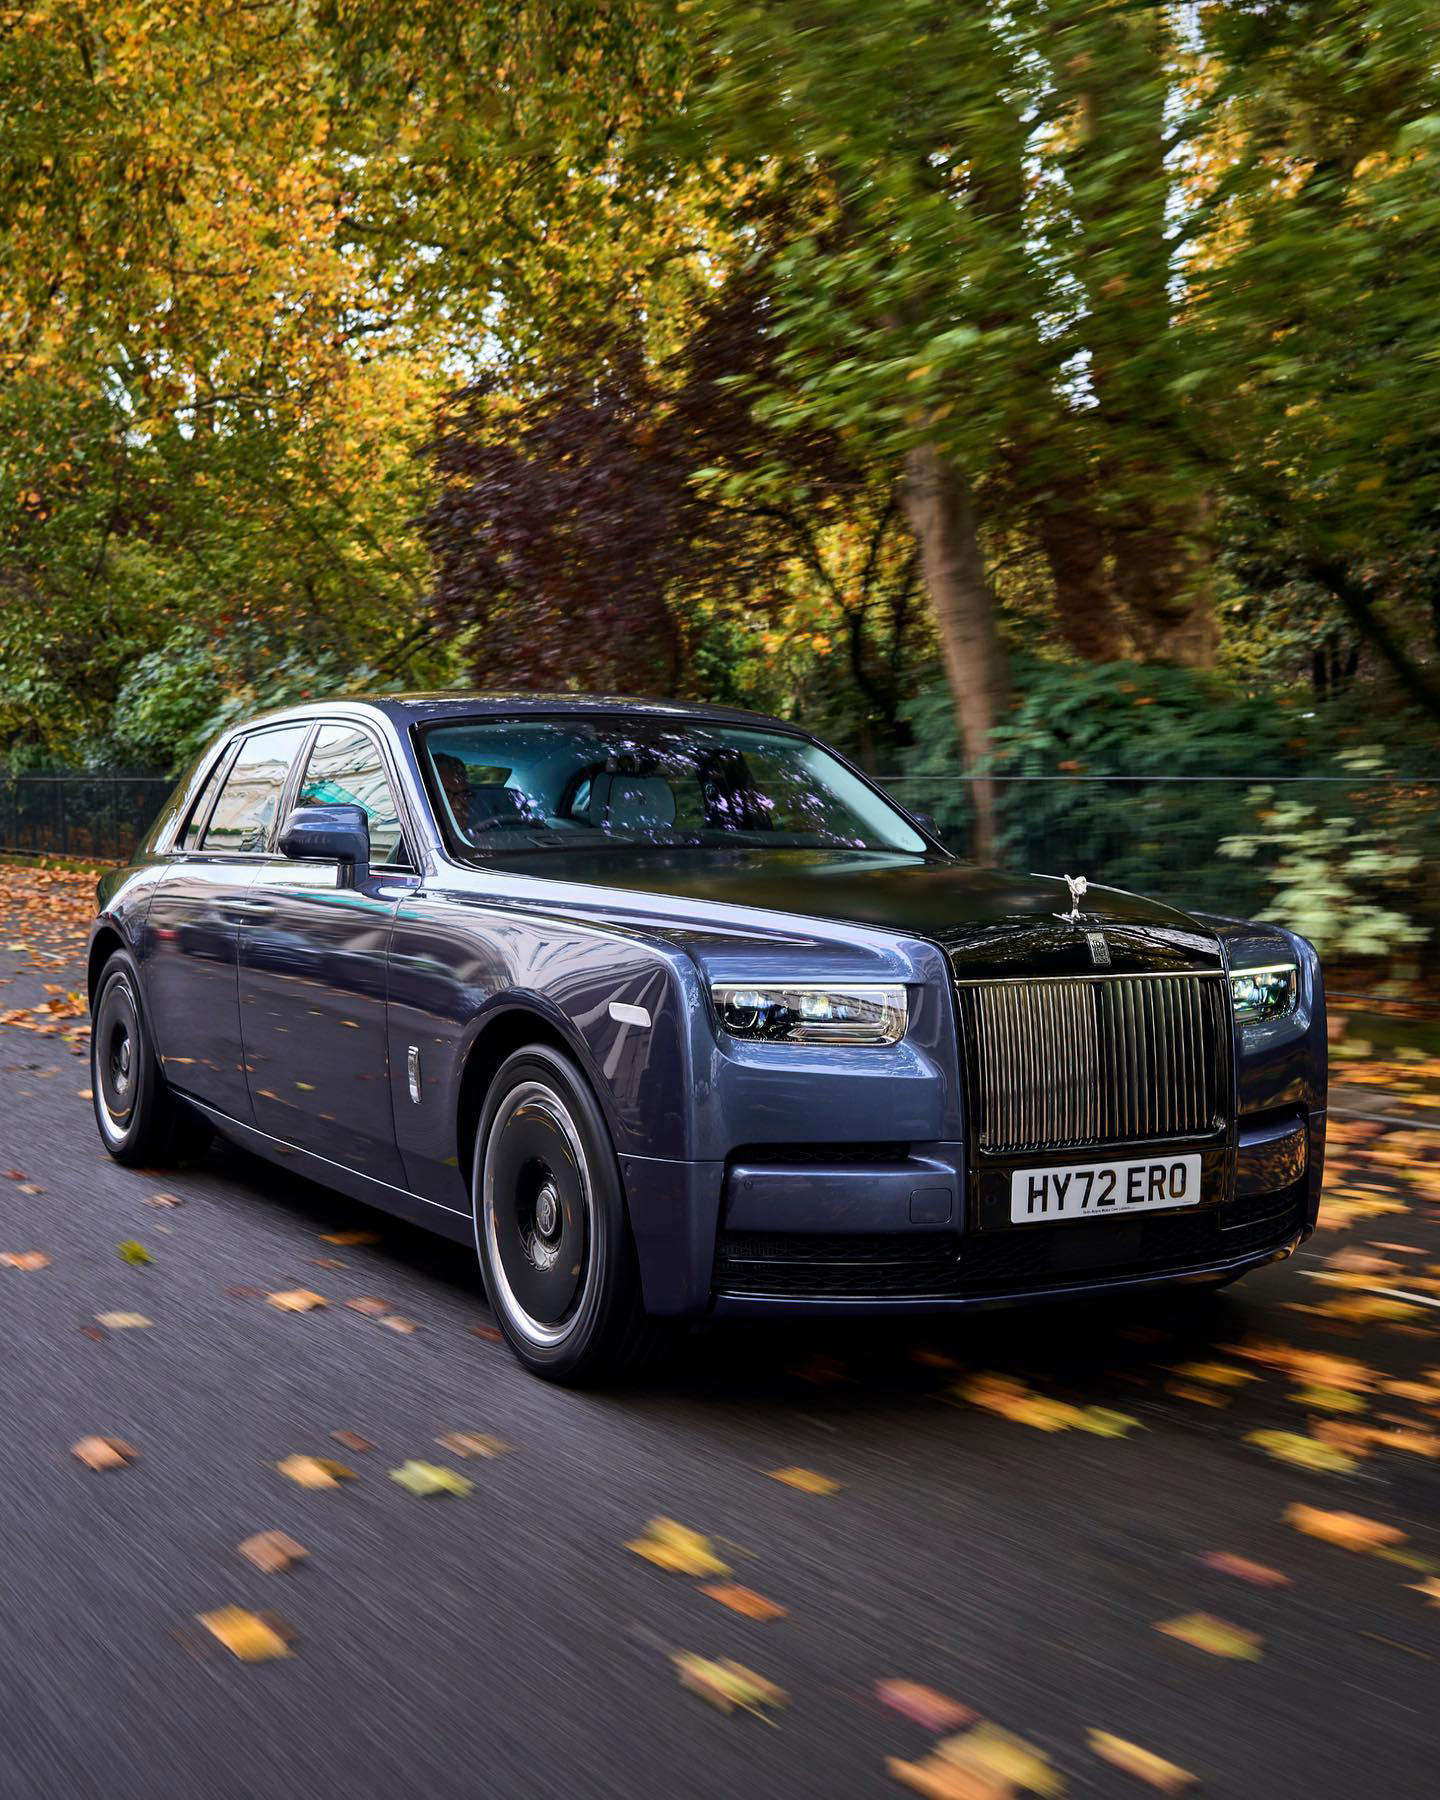 Rolls-Royce Motor Cars - A scenic drive through autumn foliage with Phantom Series II —  the newest